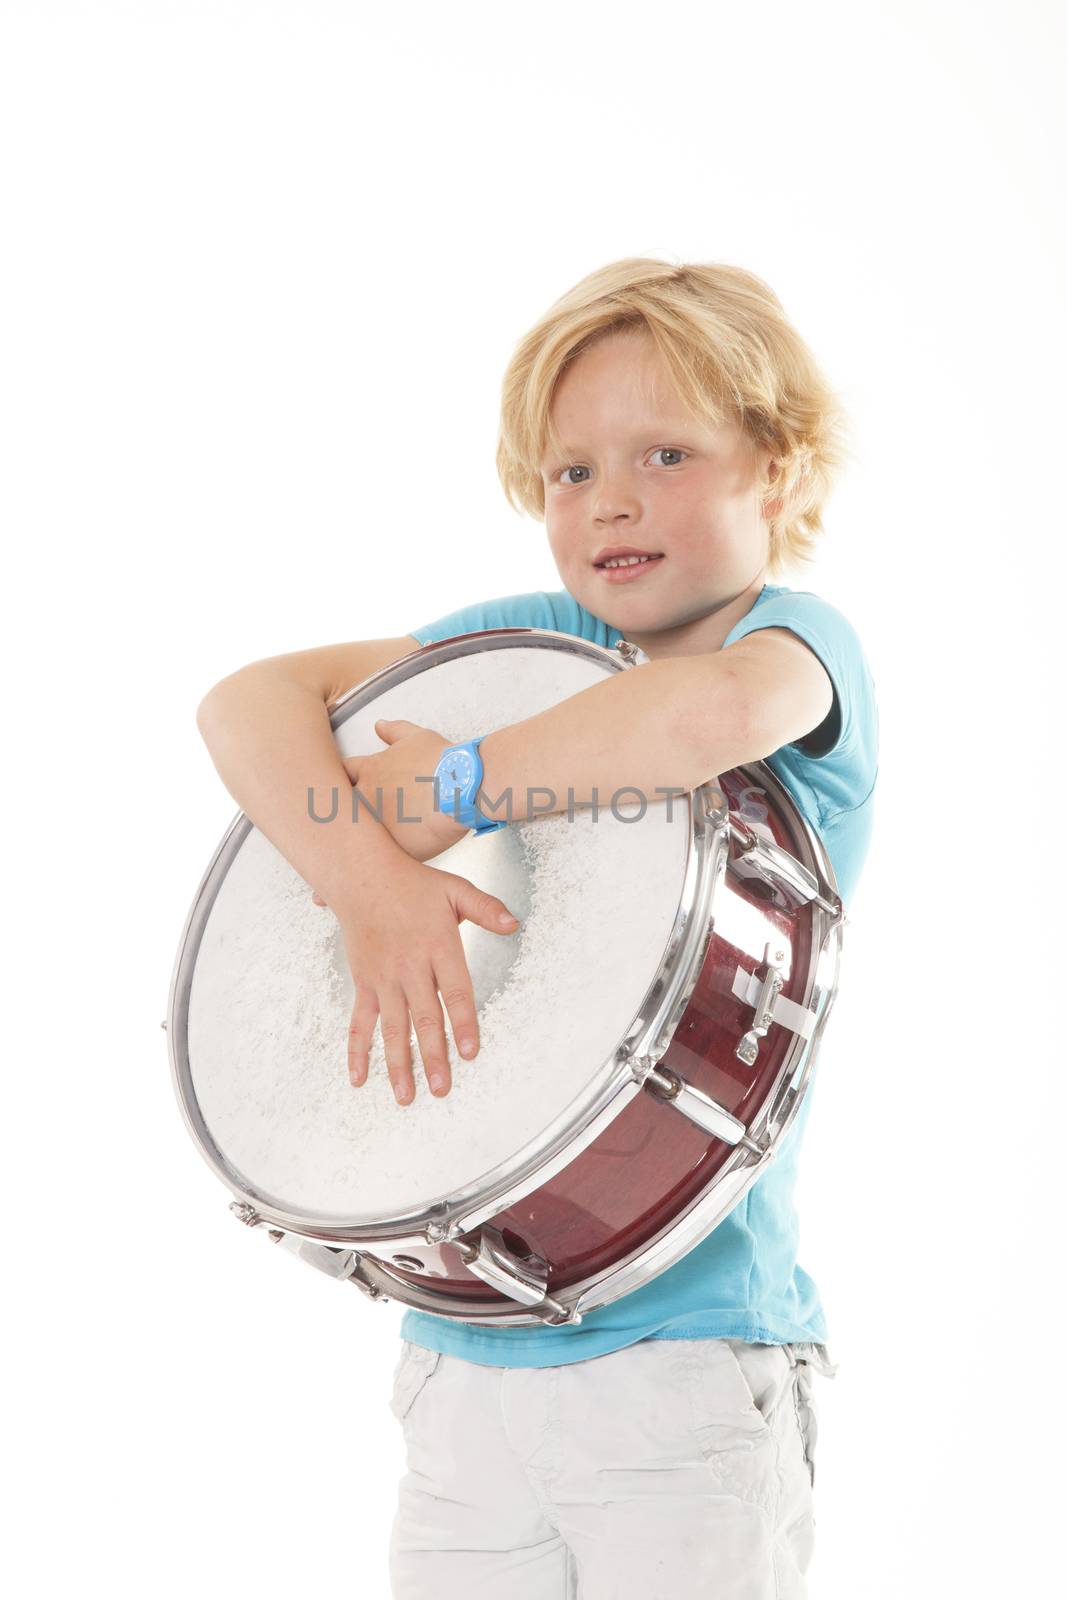 young blond boy holding drum against white background